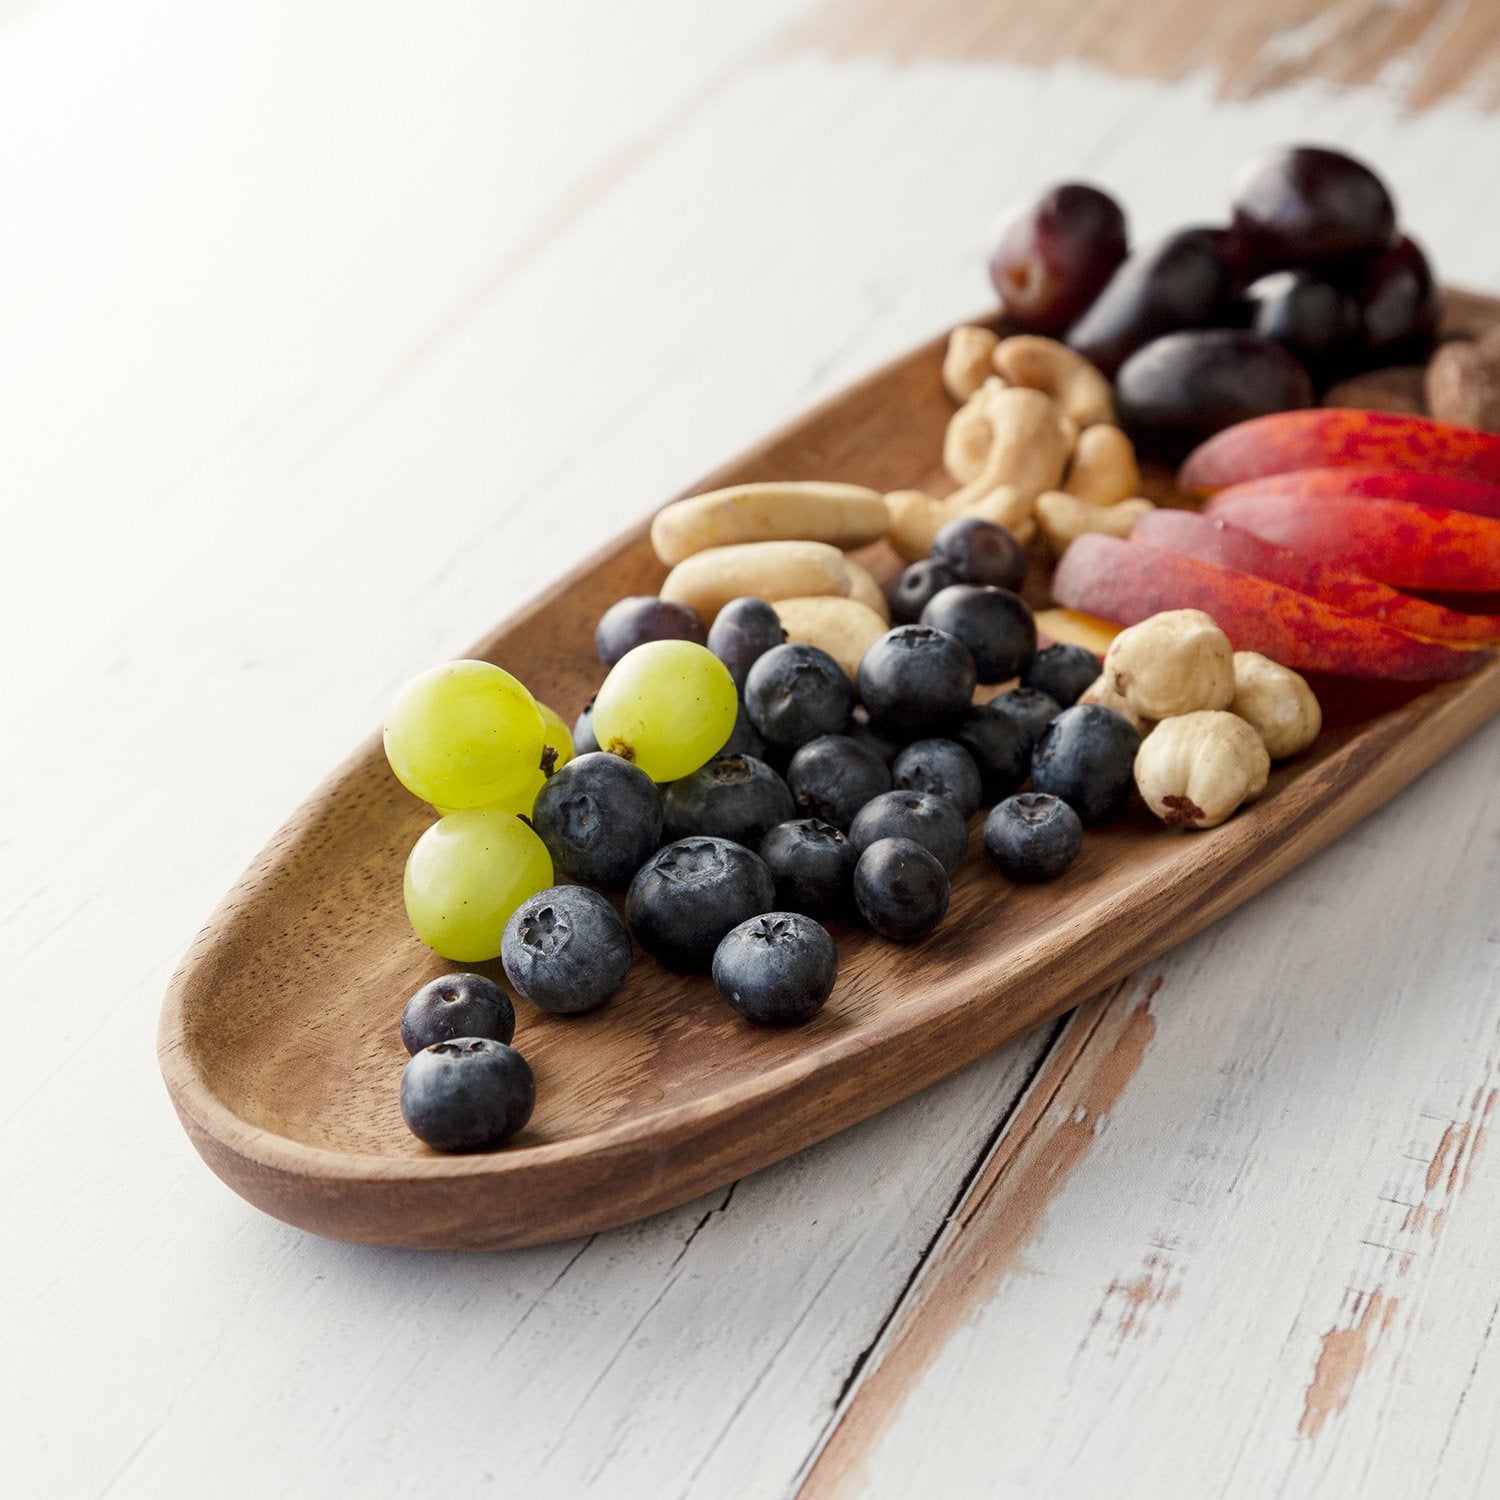 Fruit on large wooden plate